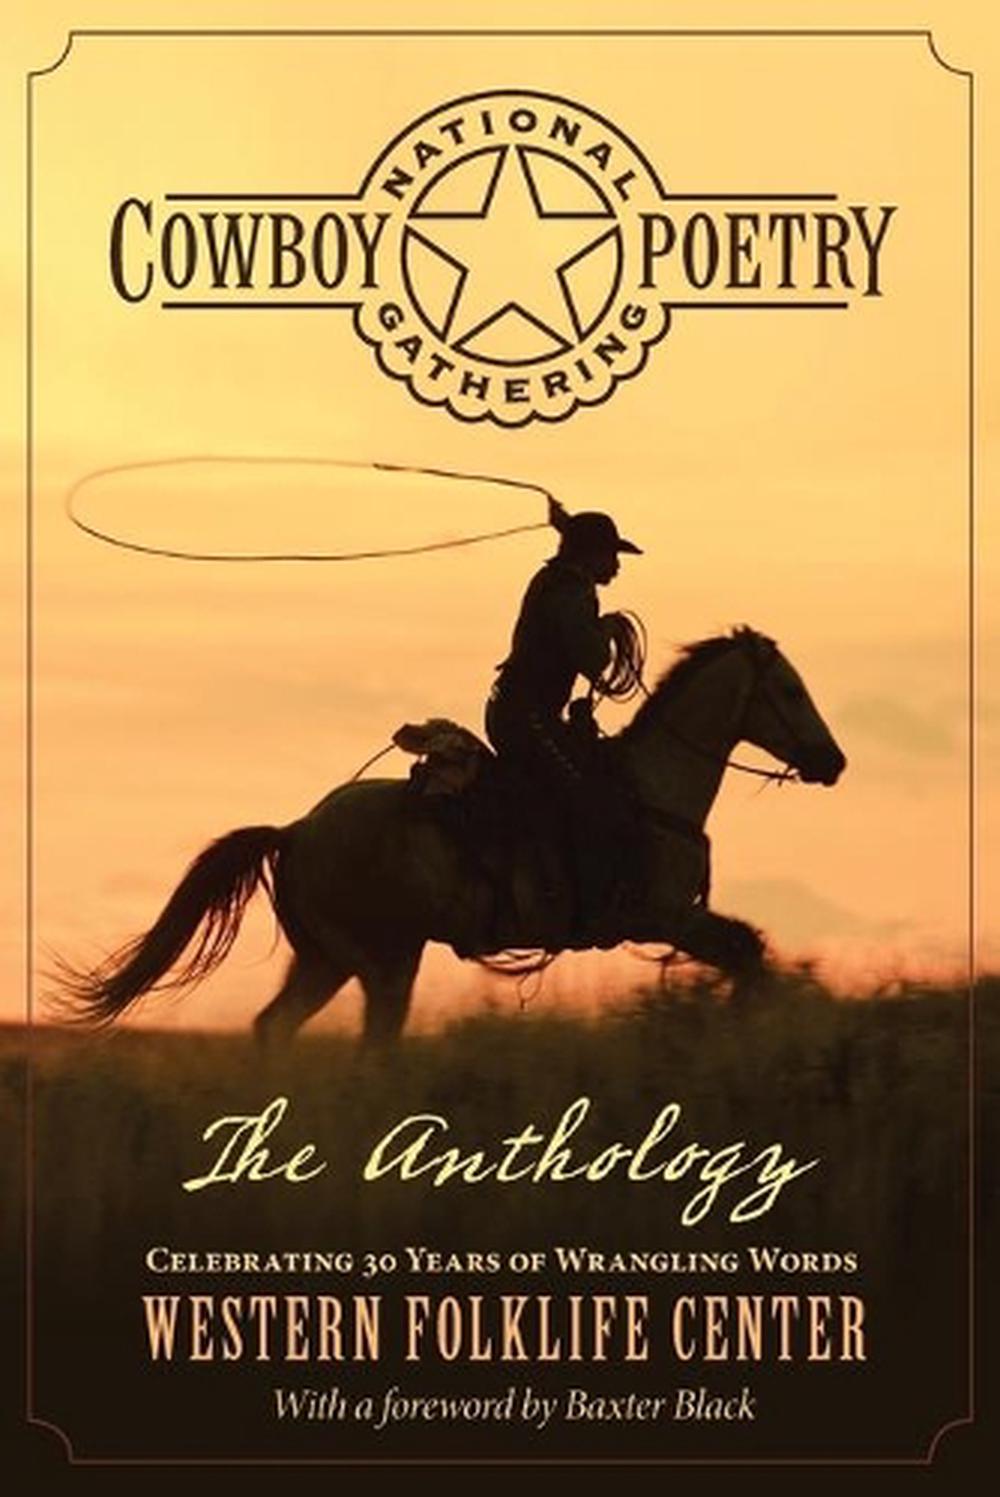 National Cowboy Poetry Gathering The Anthology by Western Folklife